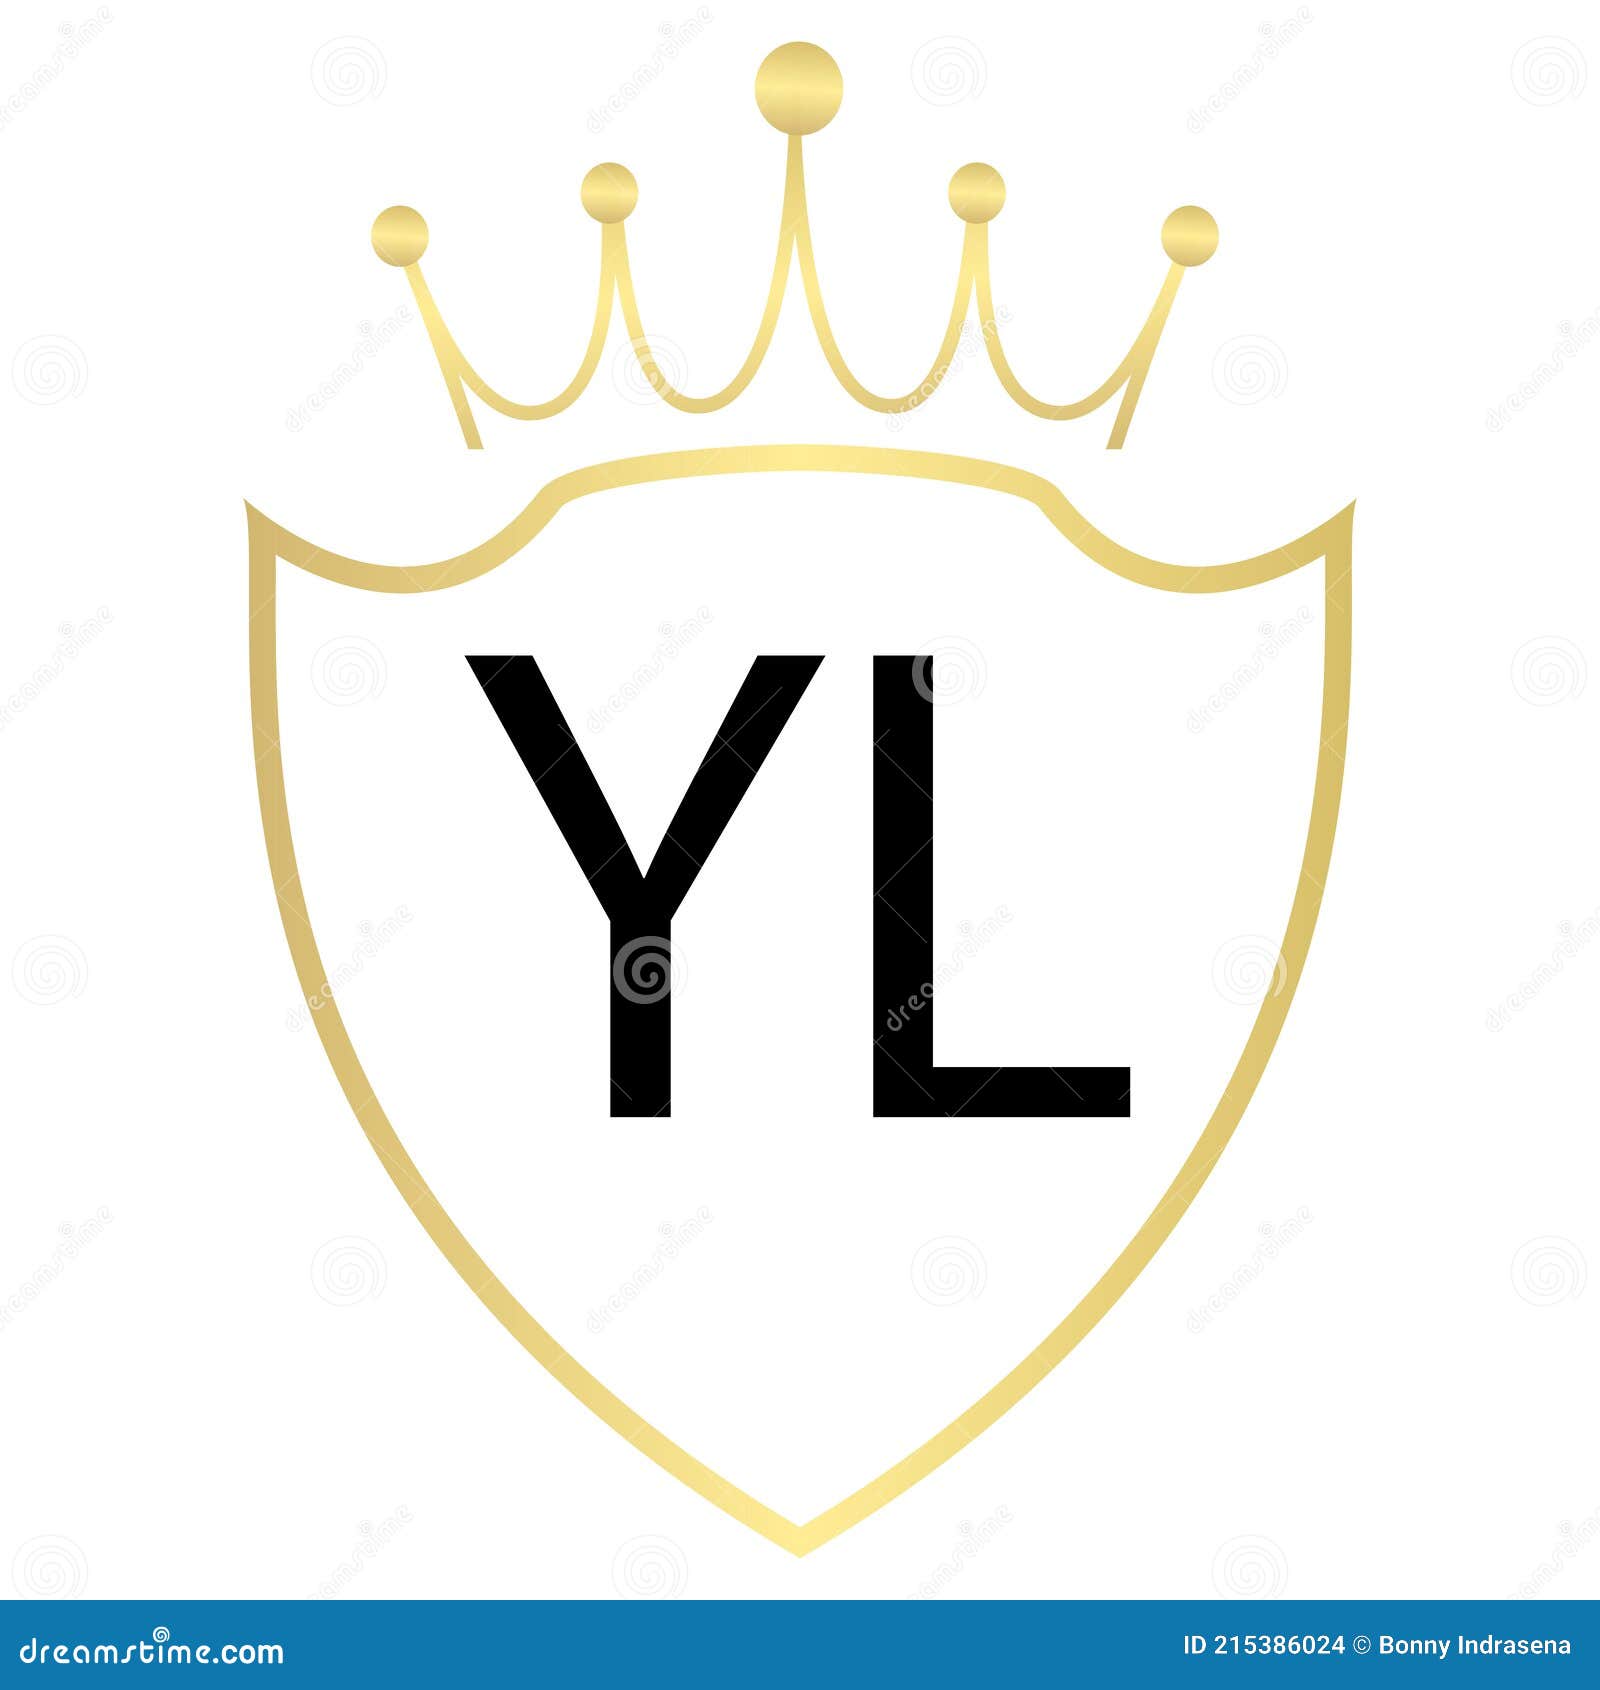 YL logo with the theme of galaxy speed and style that is suitable